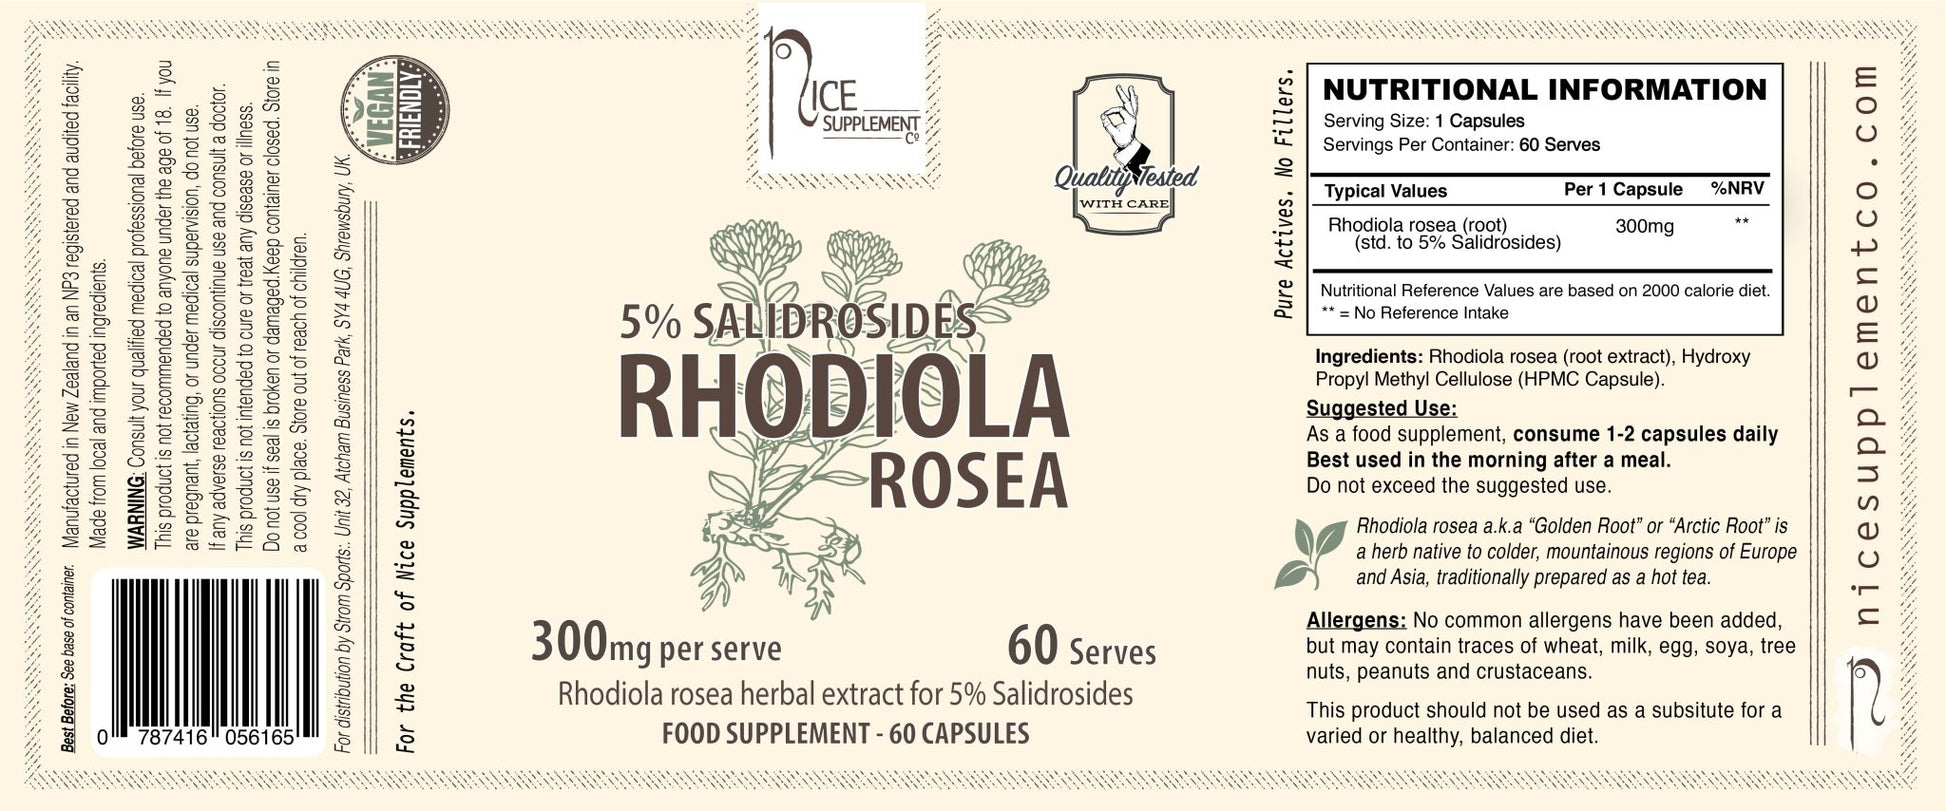 Rhodiola Rosea High Potency 5% Salidrosides for Mood and Adaptogen Stress  -  Label  - Nice Supplement Co.